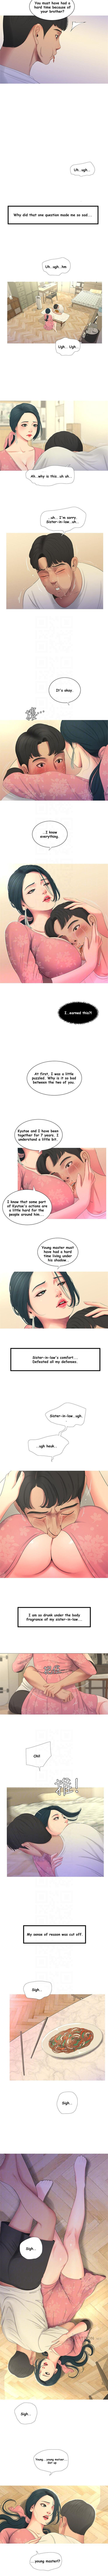 One's In-Laws Virgins Chapter 1-16 (Ongoing) [English] 31